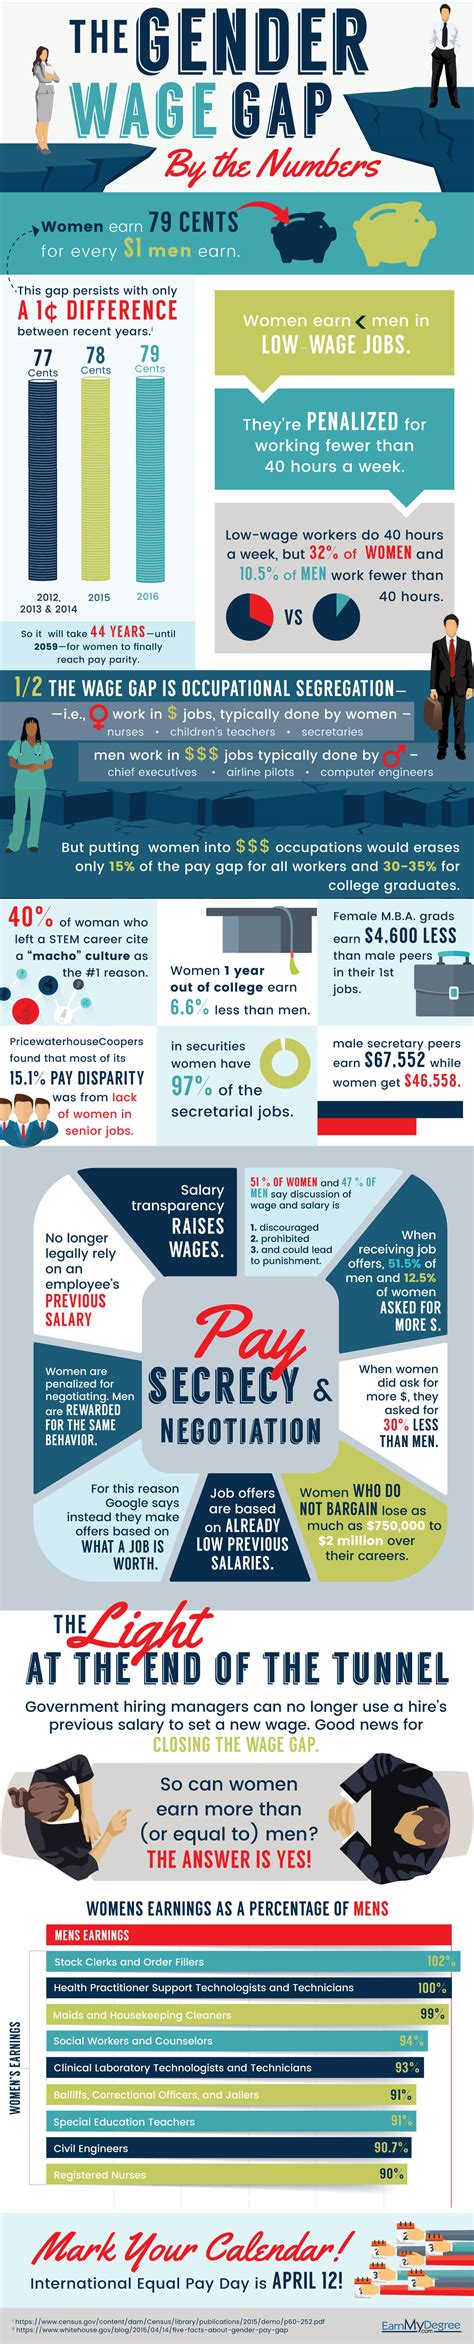 The Gender Wage Gap Breaking Down The Numbers [infographic]